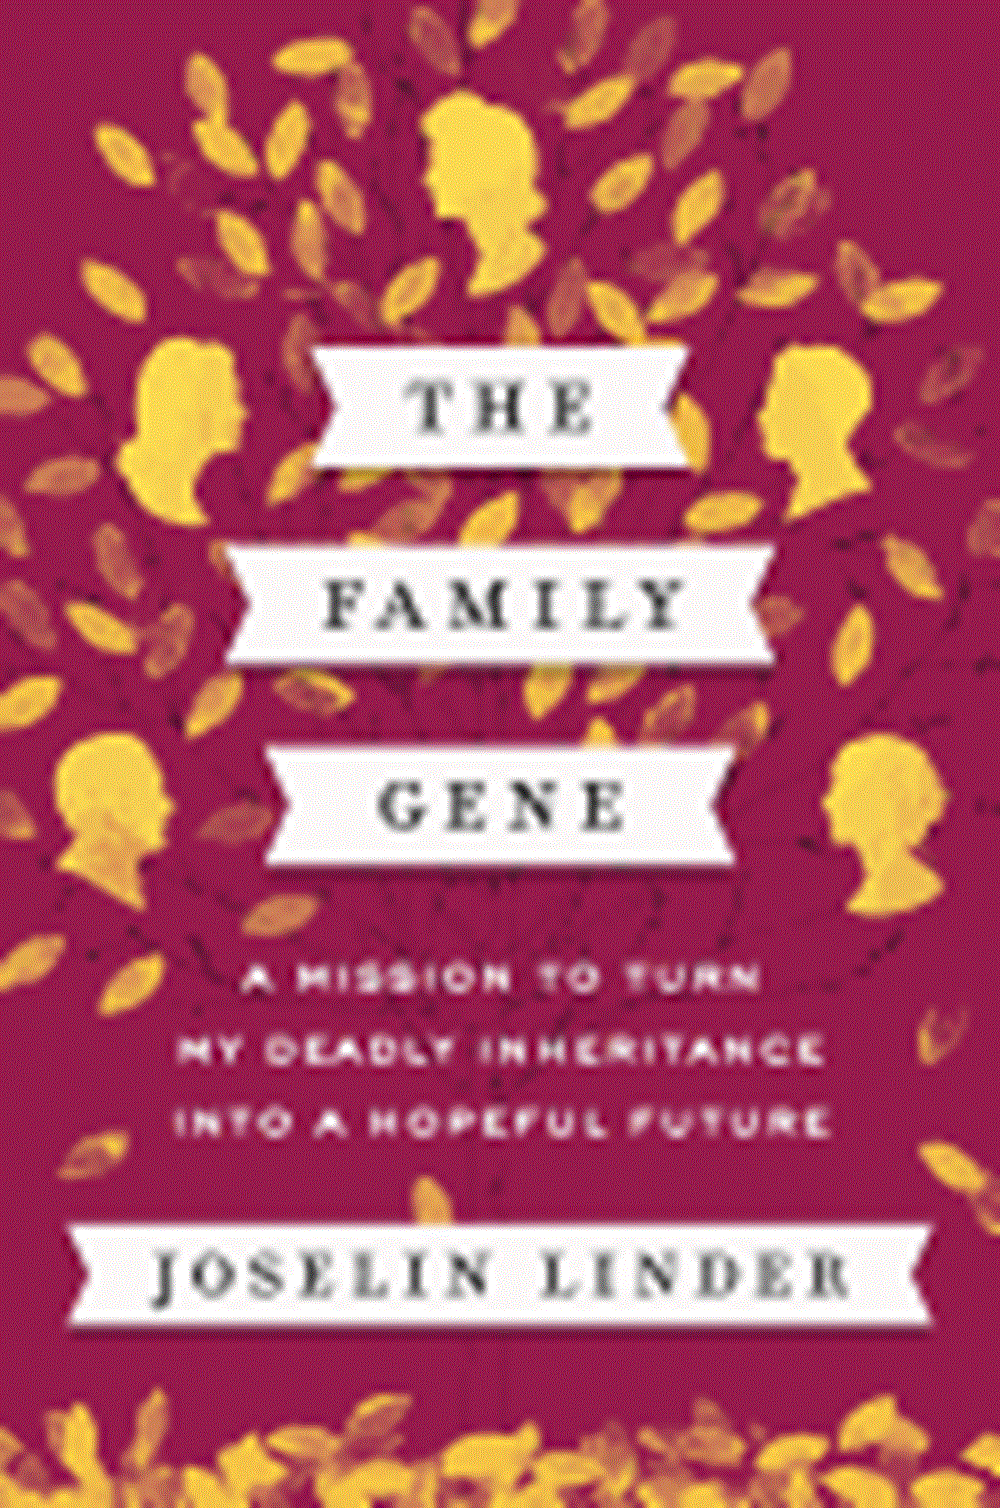 Family Gene: A Mission to Turn My Deadly Inheritance Into a Hopeful Future